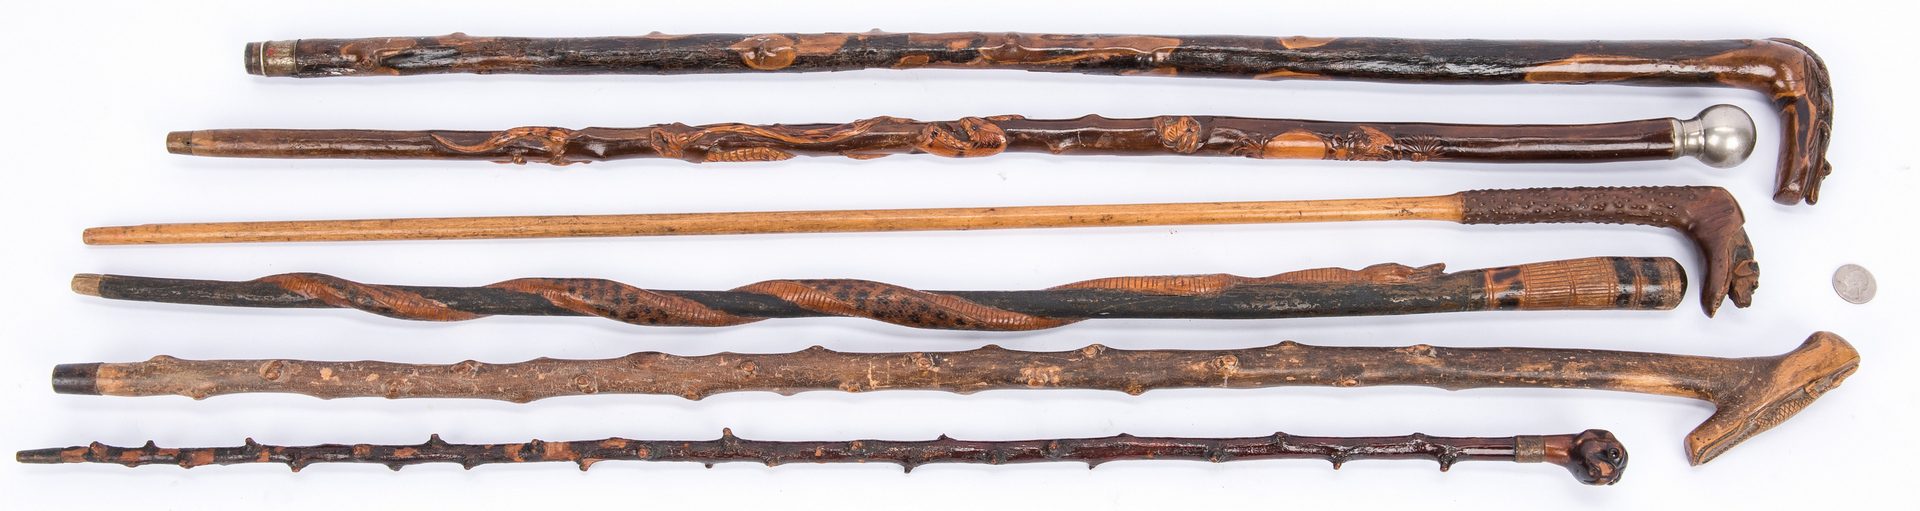 Lot 369: 6 European, American, Central American Carved Canes